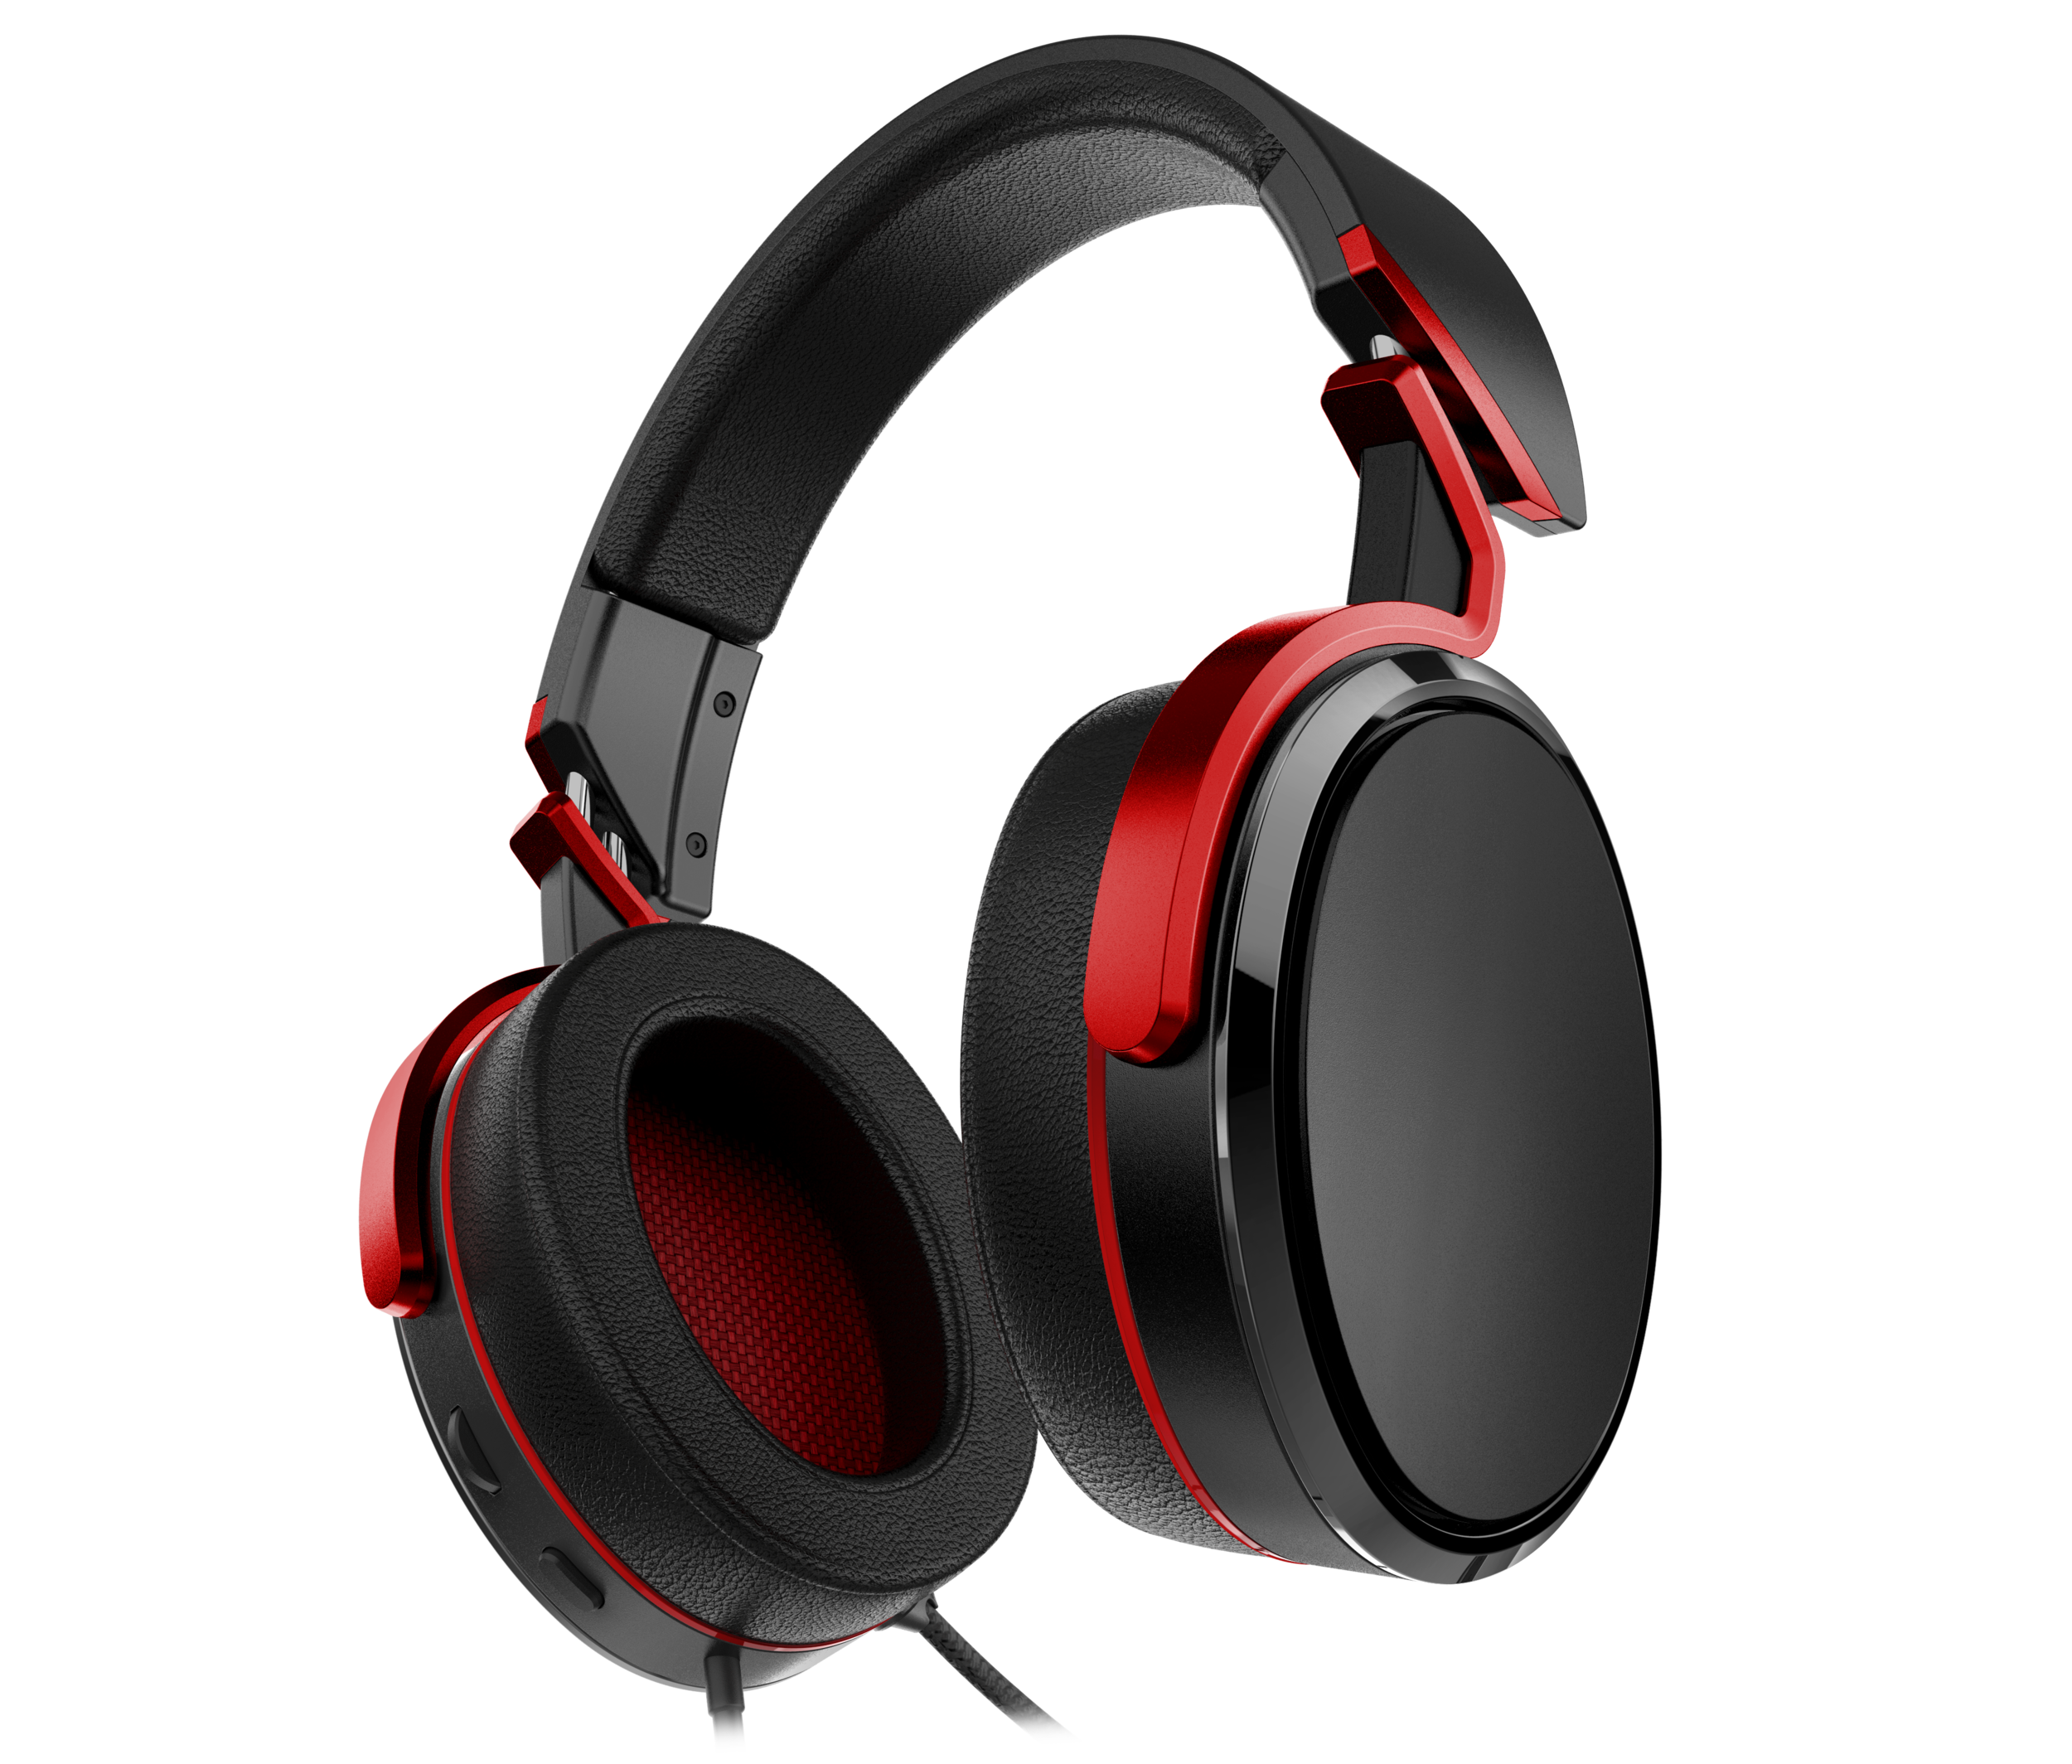 BBY gaming headphones Option Beauty1 back2 Black Red.png